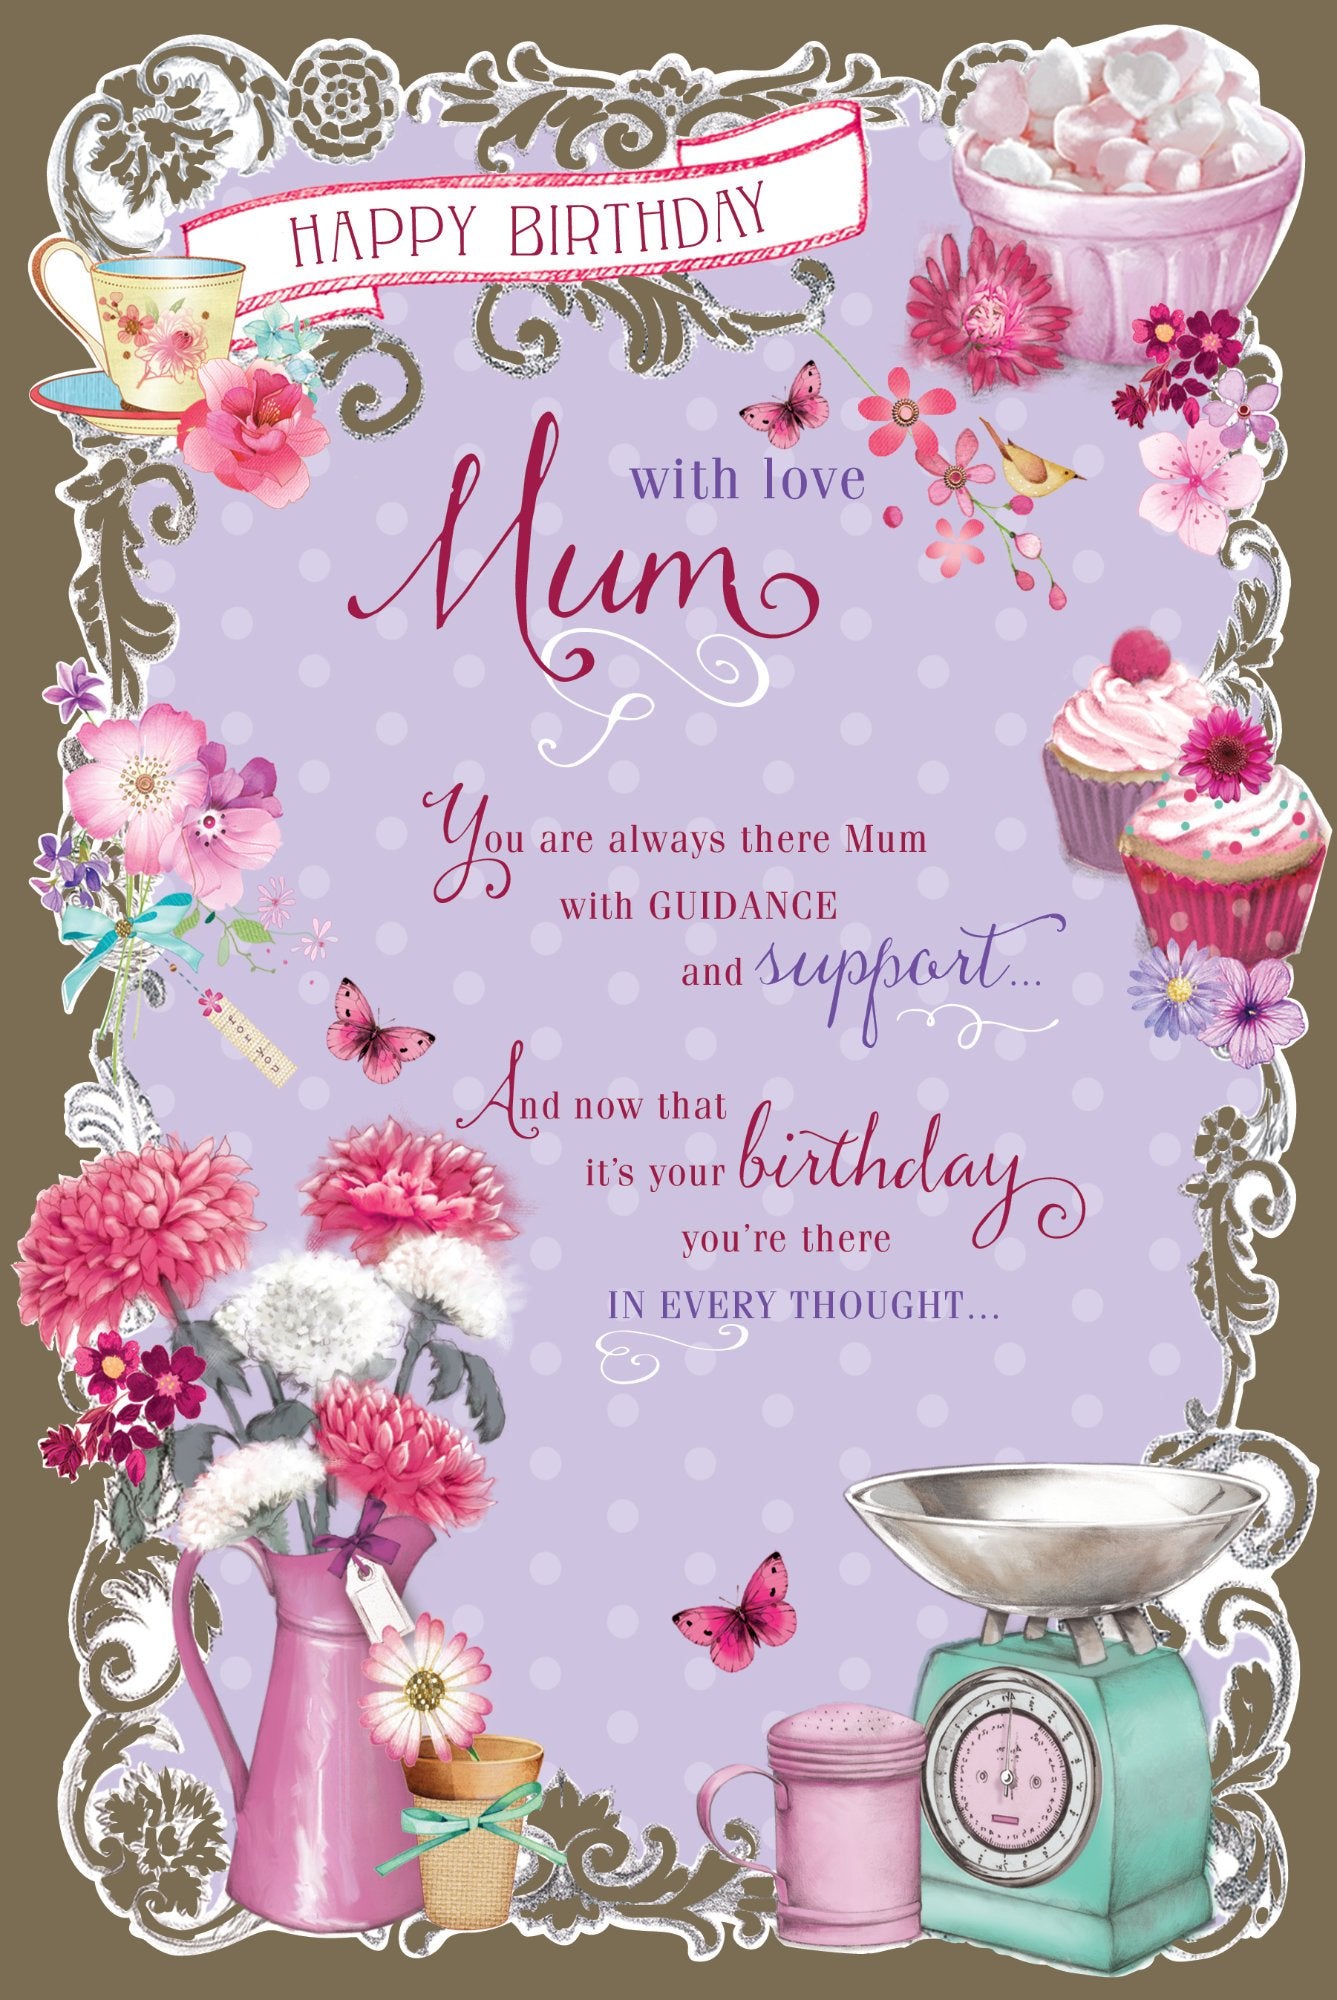 Photograph of Mum Birthday Every Thought Greetings Card at Nicole's Shop